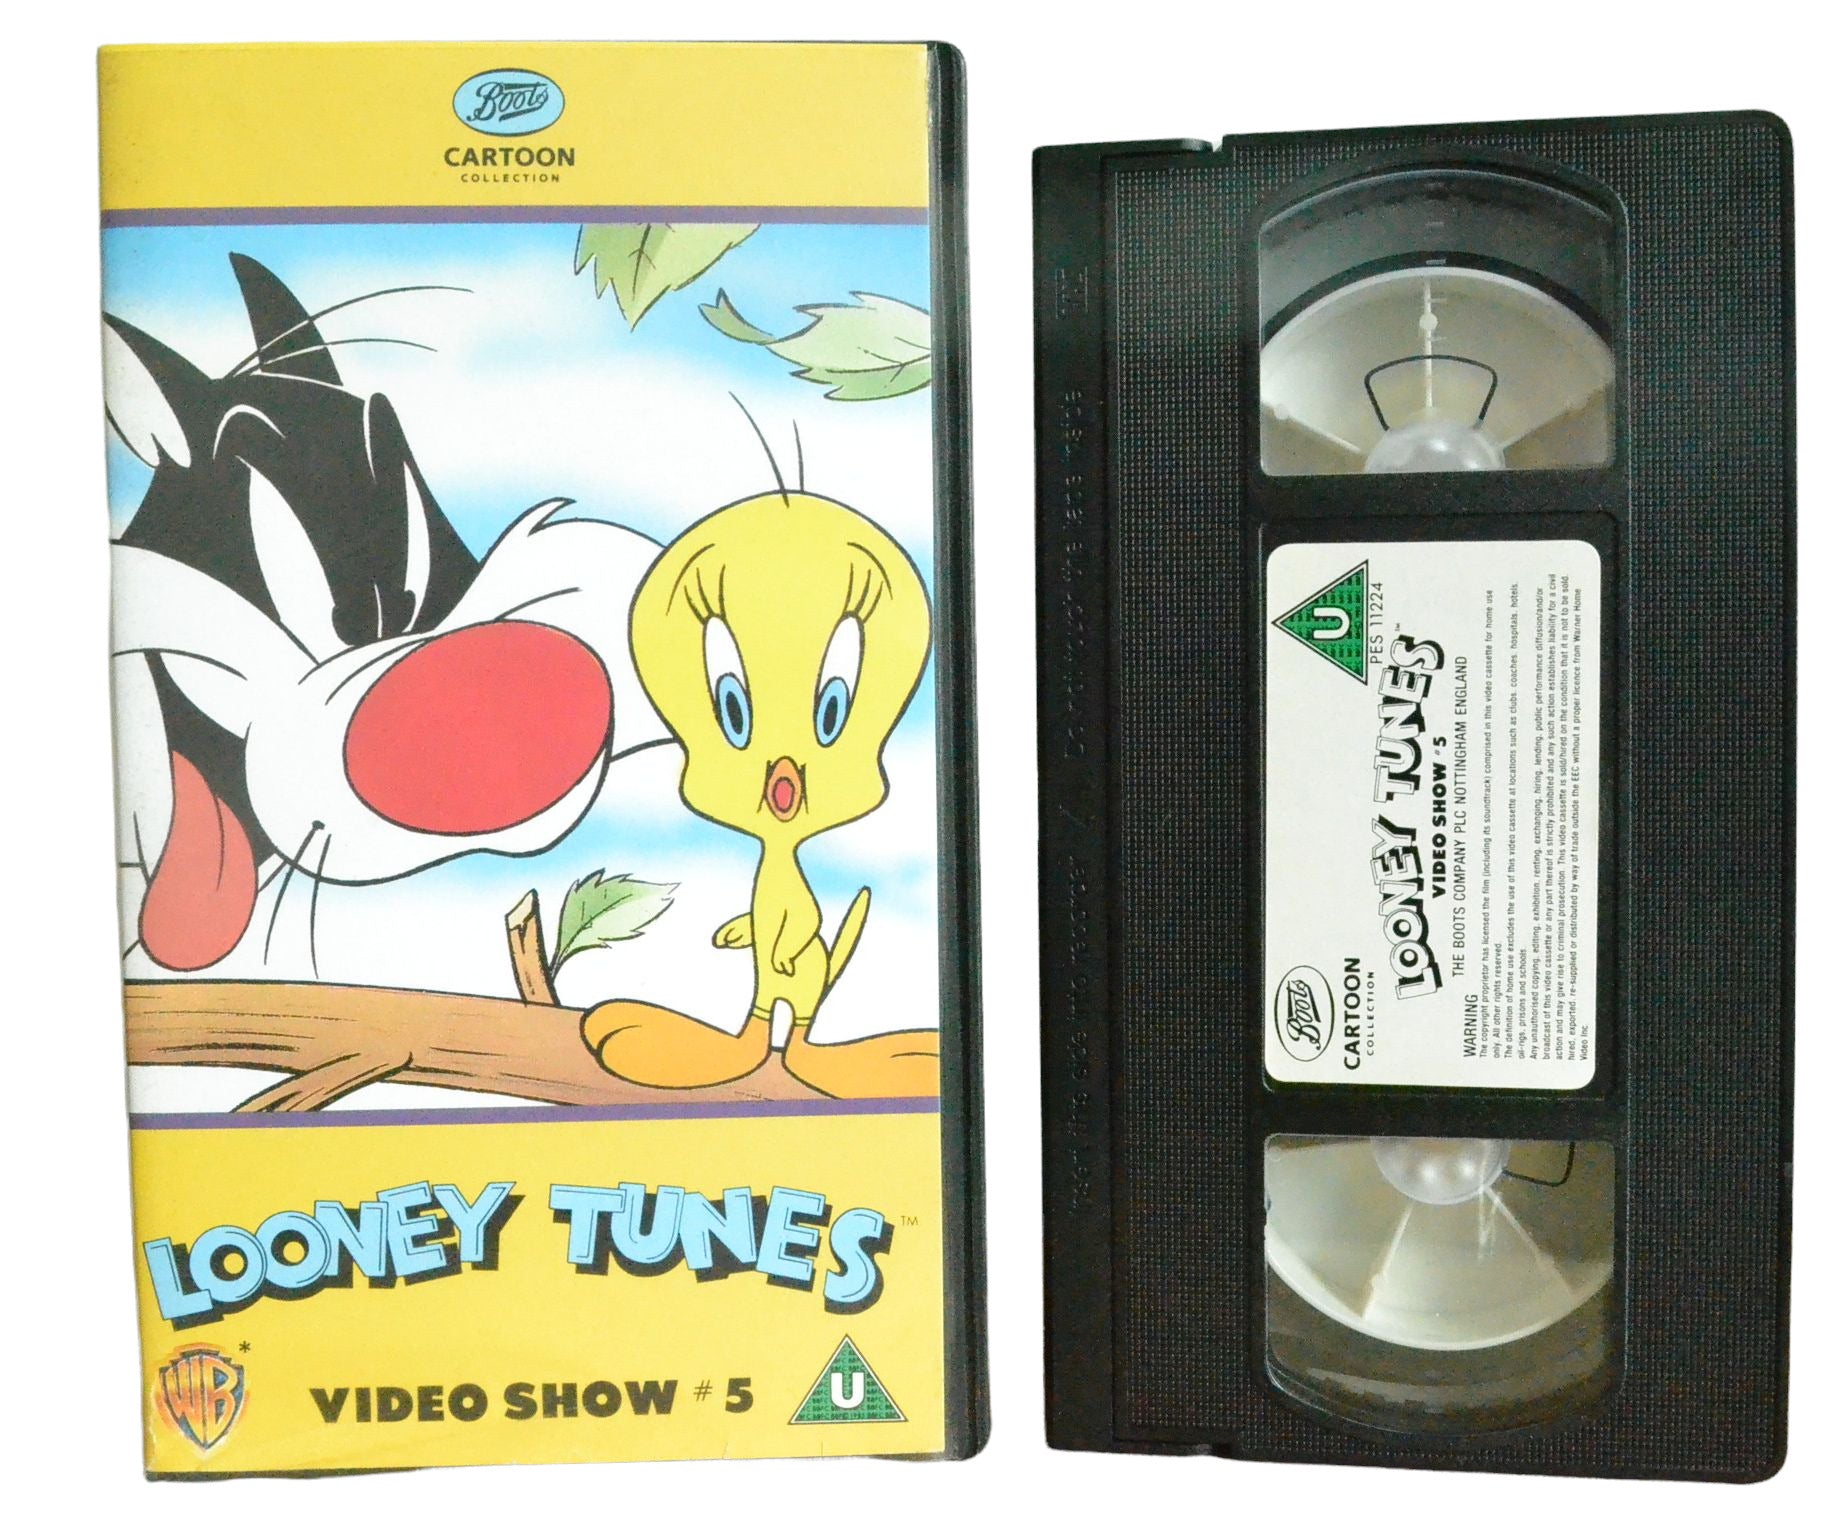 Looney Tunes: Video Show #5 - Boots Cartoon Collection - Children's - Pal VHS-